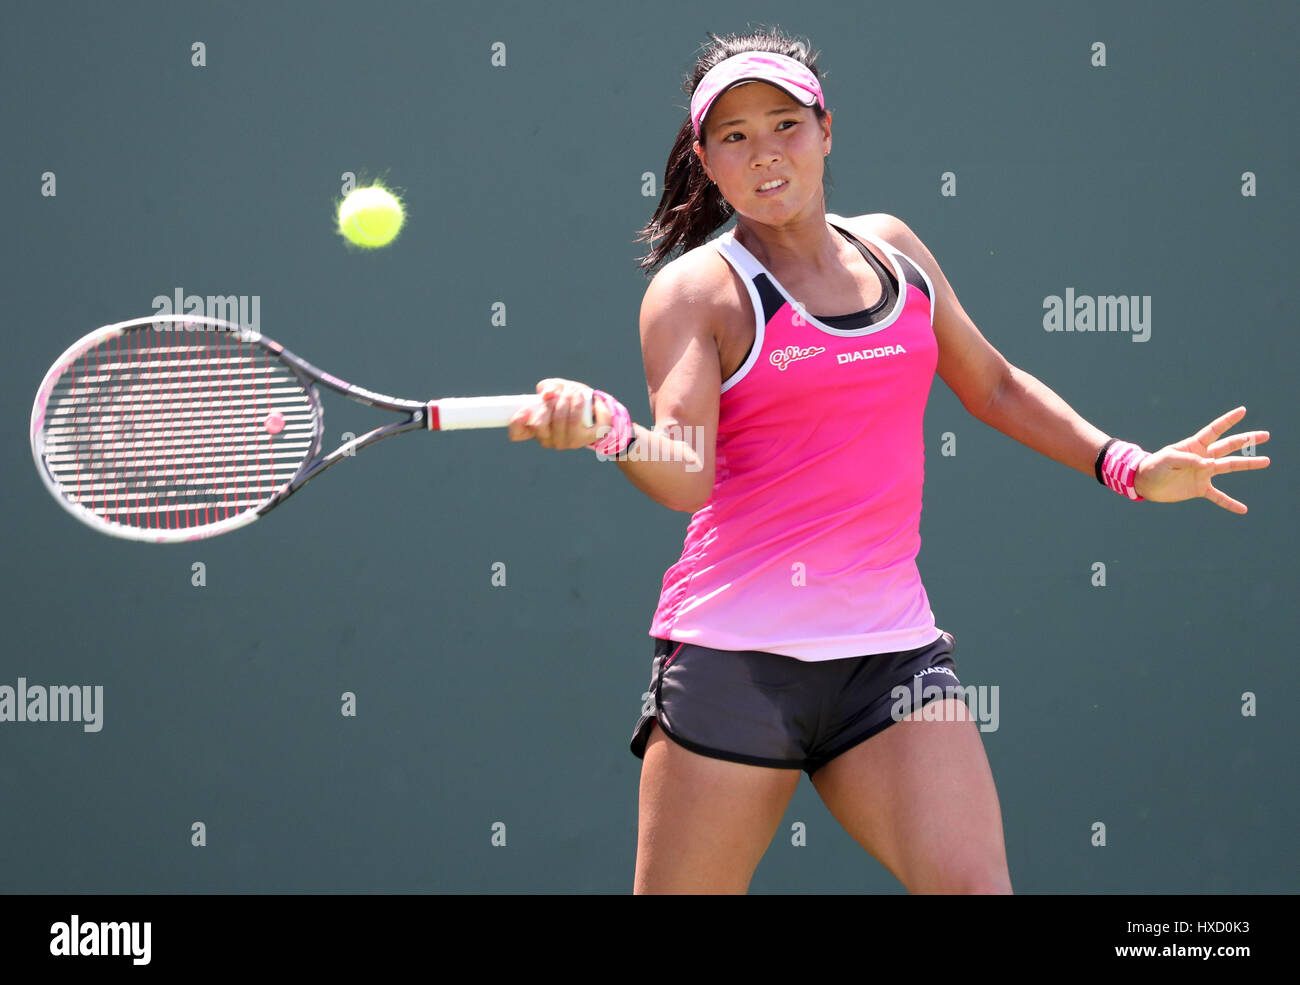 Key Biscayne, Florida, USA. 26th Mar, 2017. Risa Ozaki, of Japan, plays  against Julia Goerges, of Germany, during her winning match at the 2017  Miami Open presented by Itau professional tennis tournament,